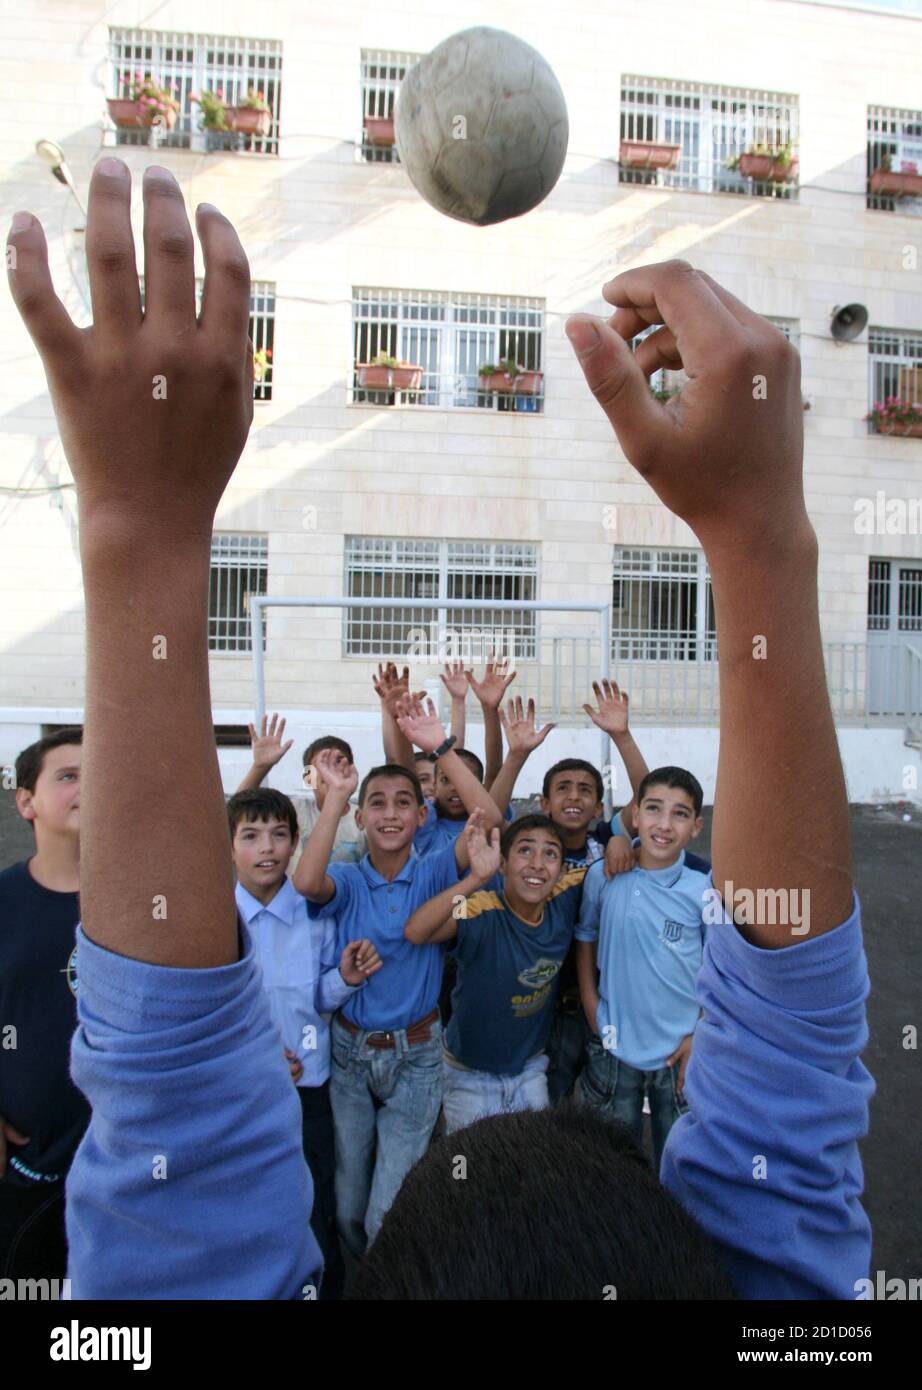 Palestinian youths play together on the third day of the closure of schools affected by a strike in the West Bank city of Hebron September 4, 2006. Tens of thousands of Palestinian government employees began a strike in the West Bank and Gaza on Saturday in protest against unpaid salaries and the perceived failings of the Hamas-led government.  REUTERS/Nayef Hashlamoun (WEST BANK) Stock Photo